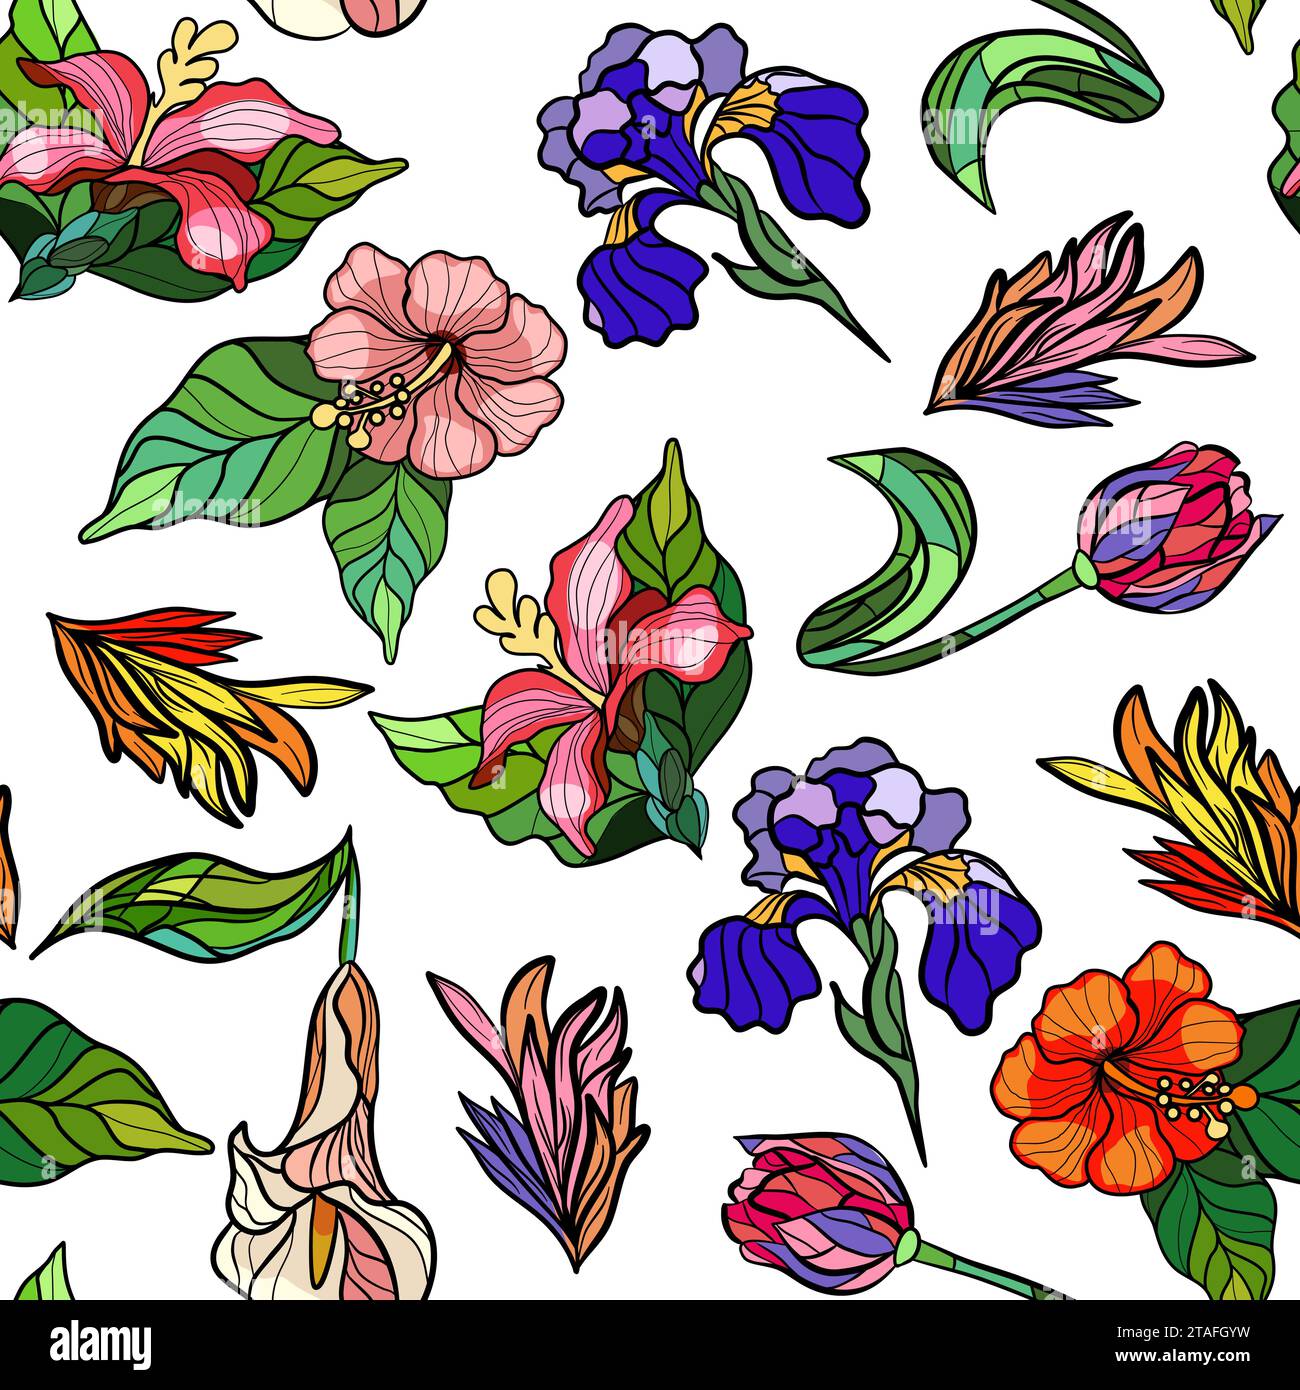 Seamless floral pattern with stained glass flowers. Vector illustration Stock Vector